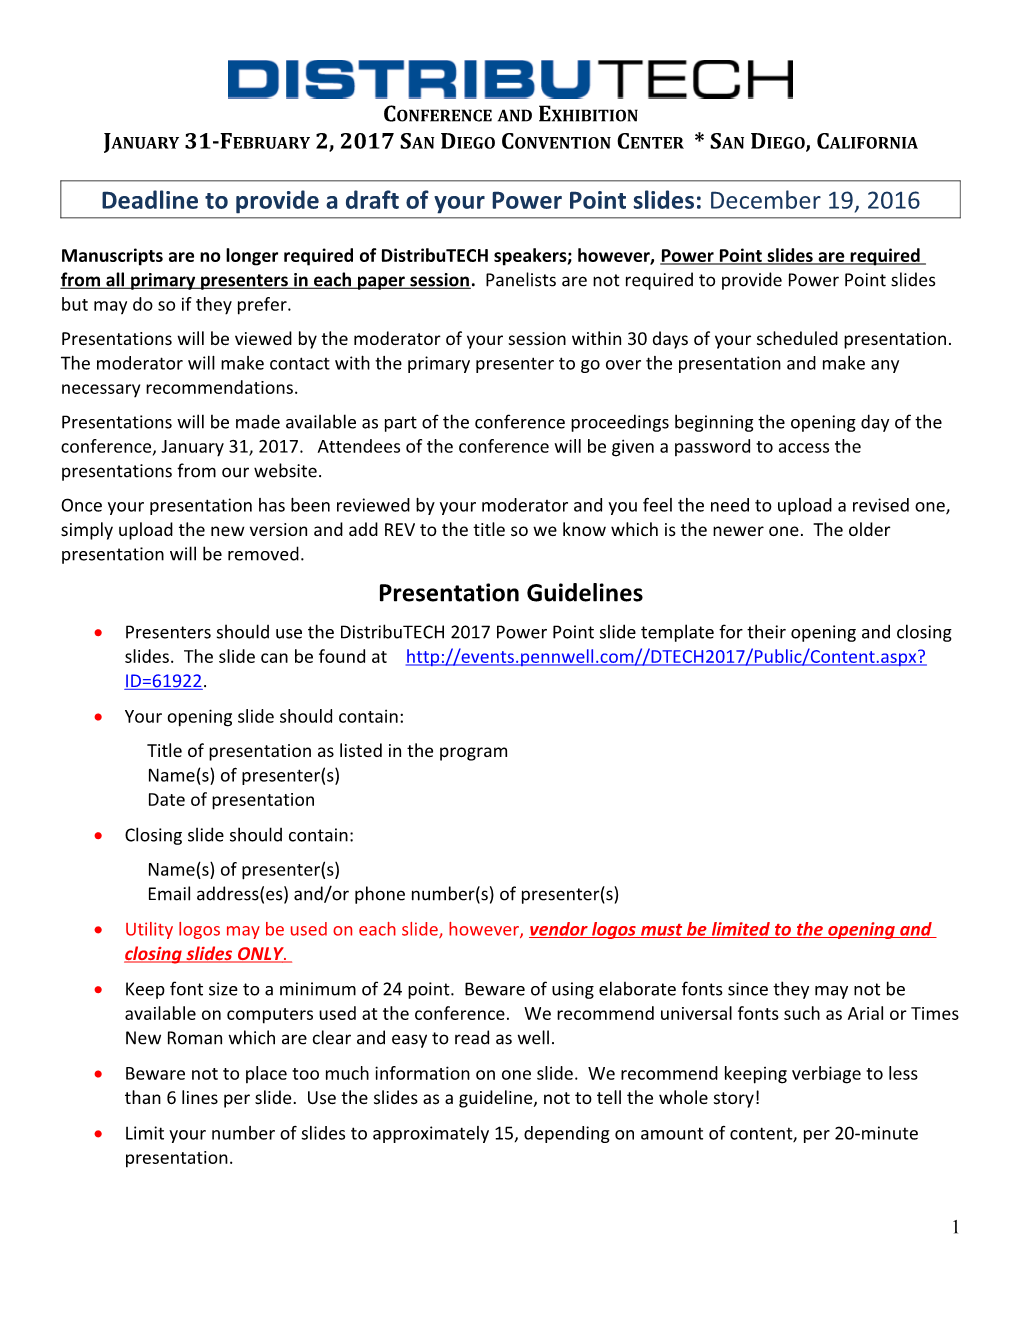 Deadline to Provide a Draft of Your Power Point Slides: December 19, 2016